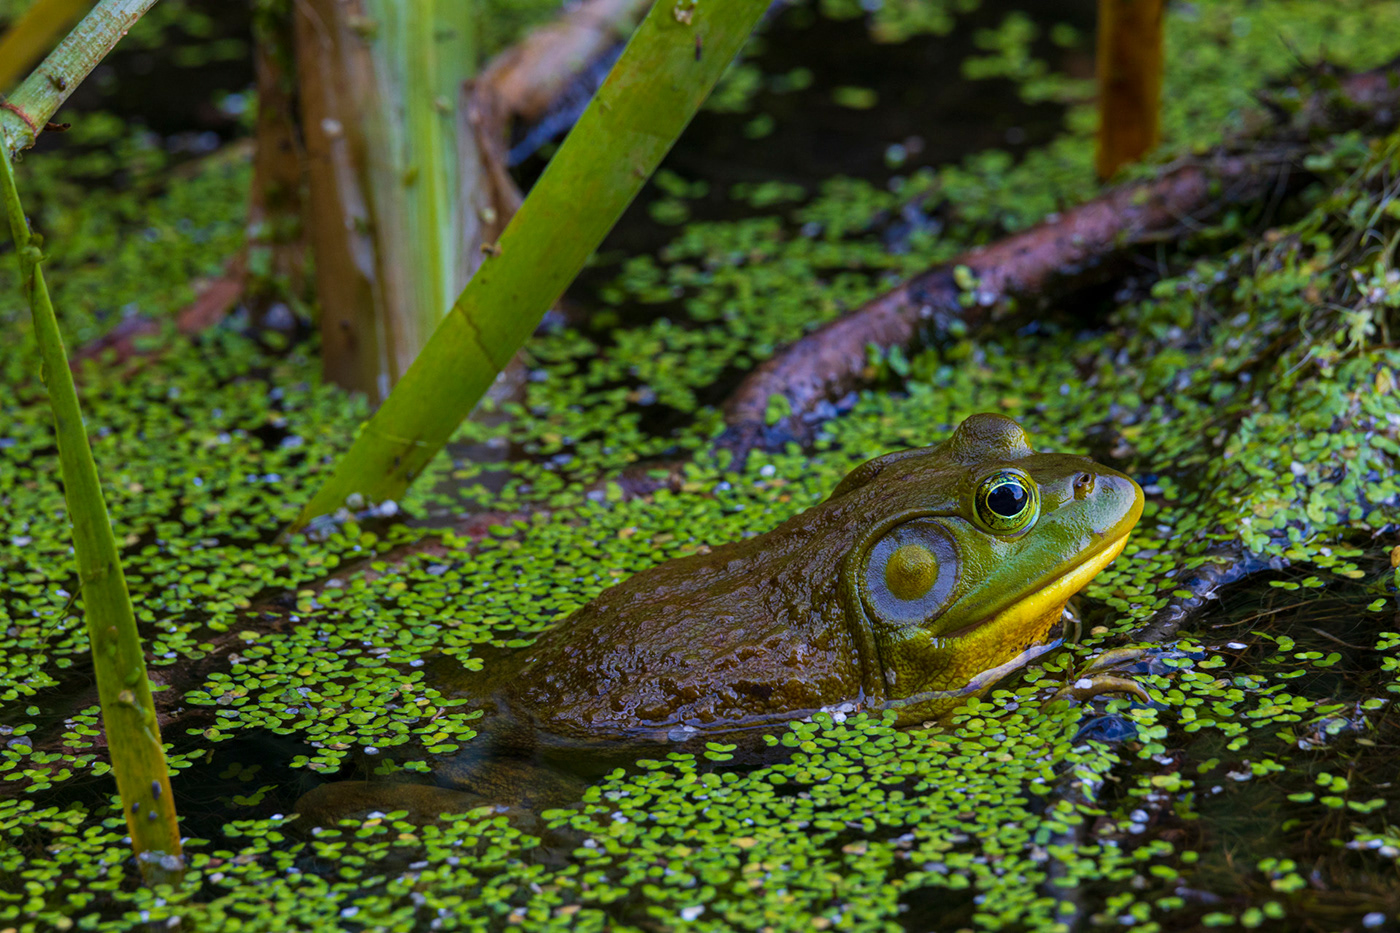 American bullfrogs brown bullfrog duck weeds green lily pads shiny smooth wetland young frogs